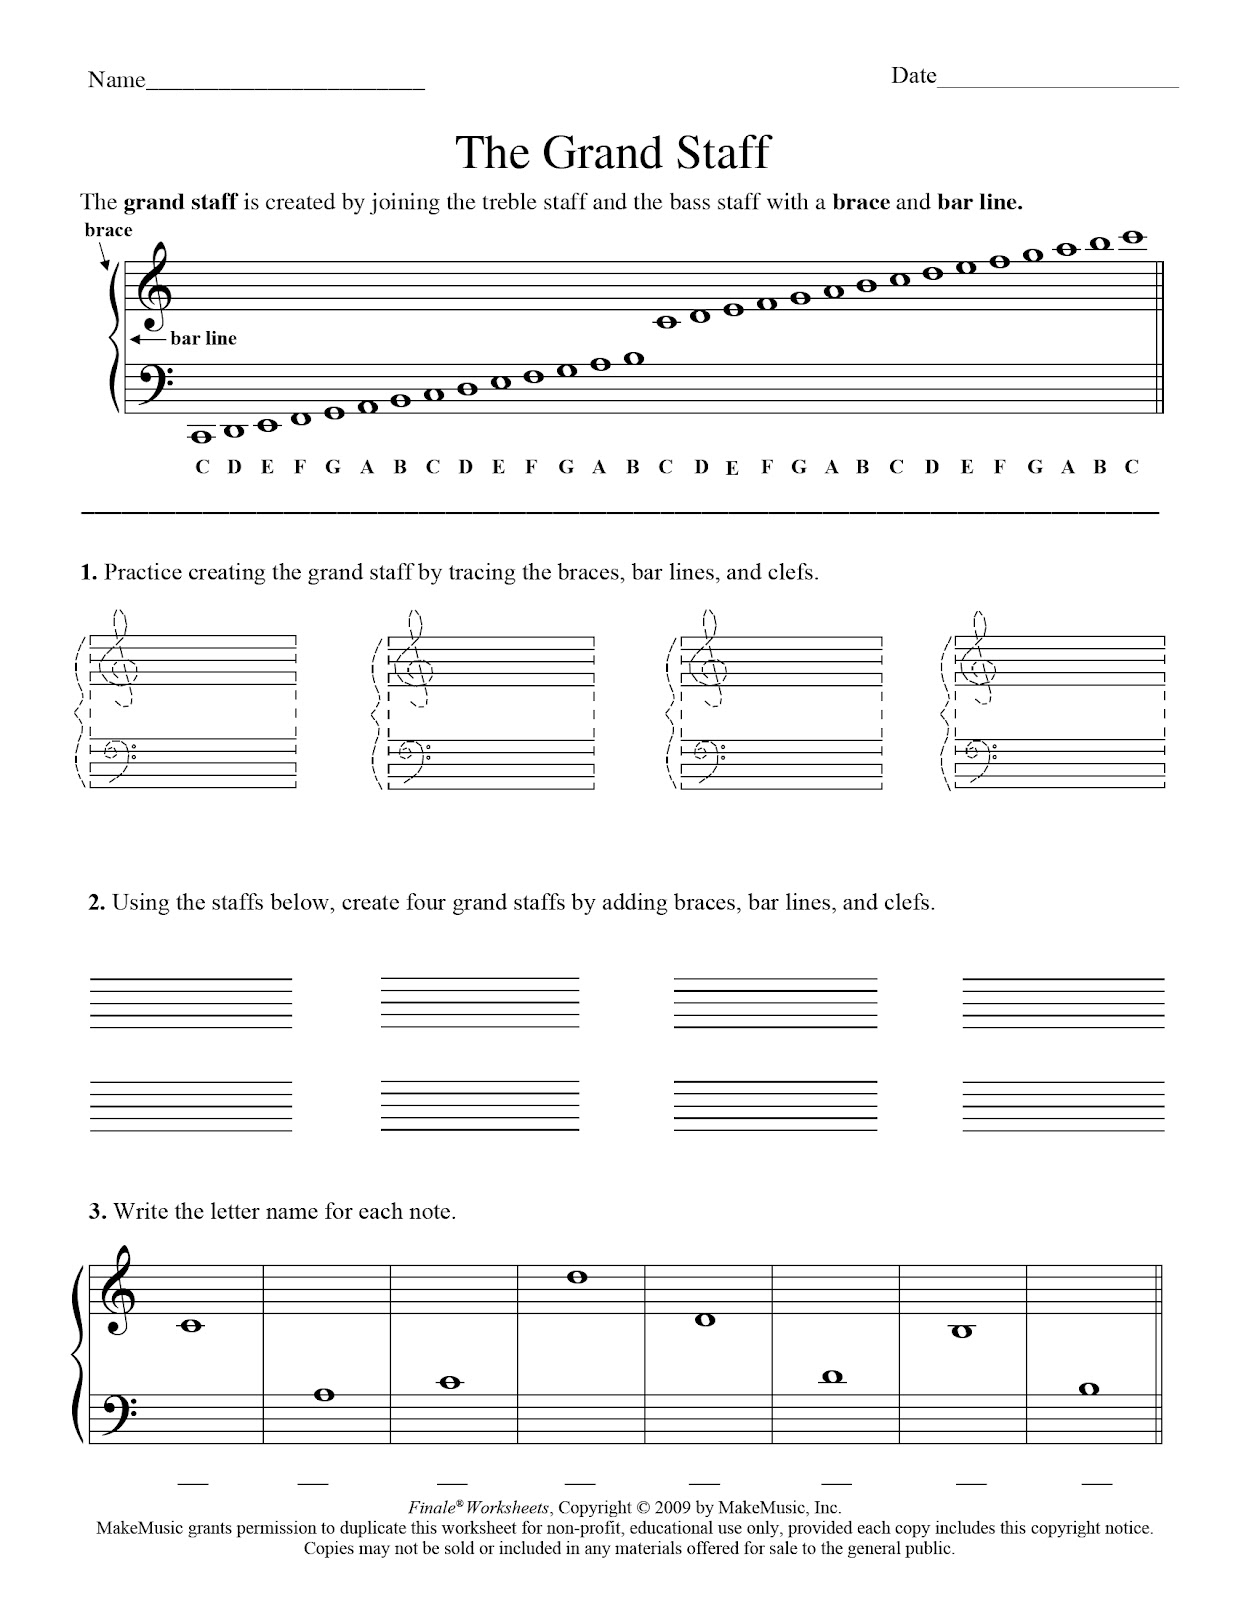 Miss Jacobson's Music: THEORY #8: GRAND STAFF NOTE READING